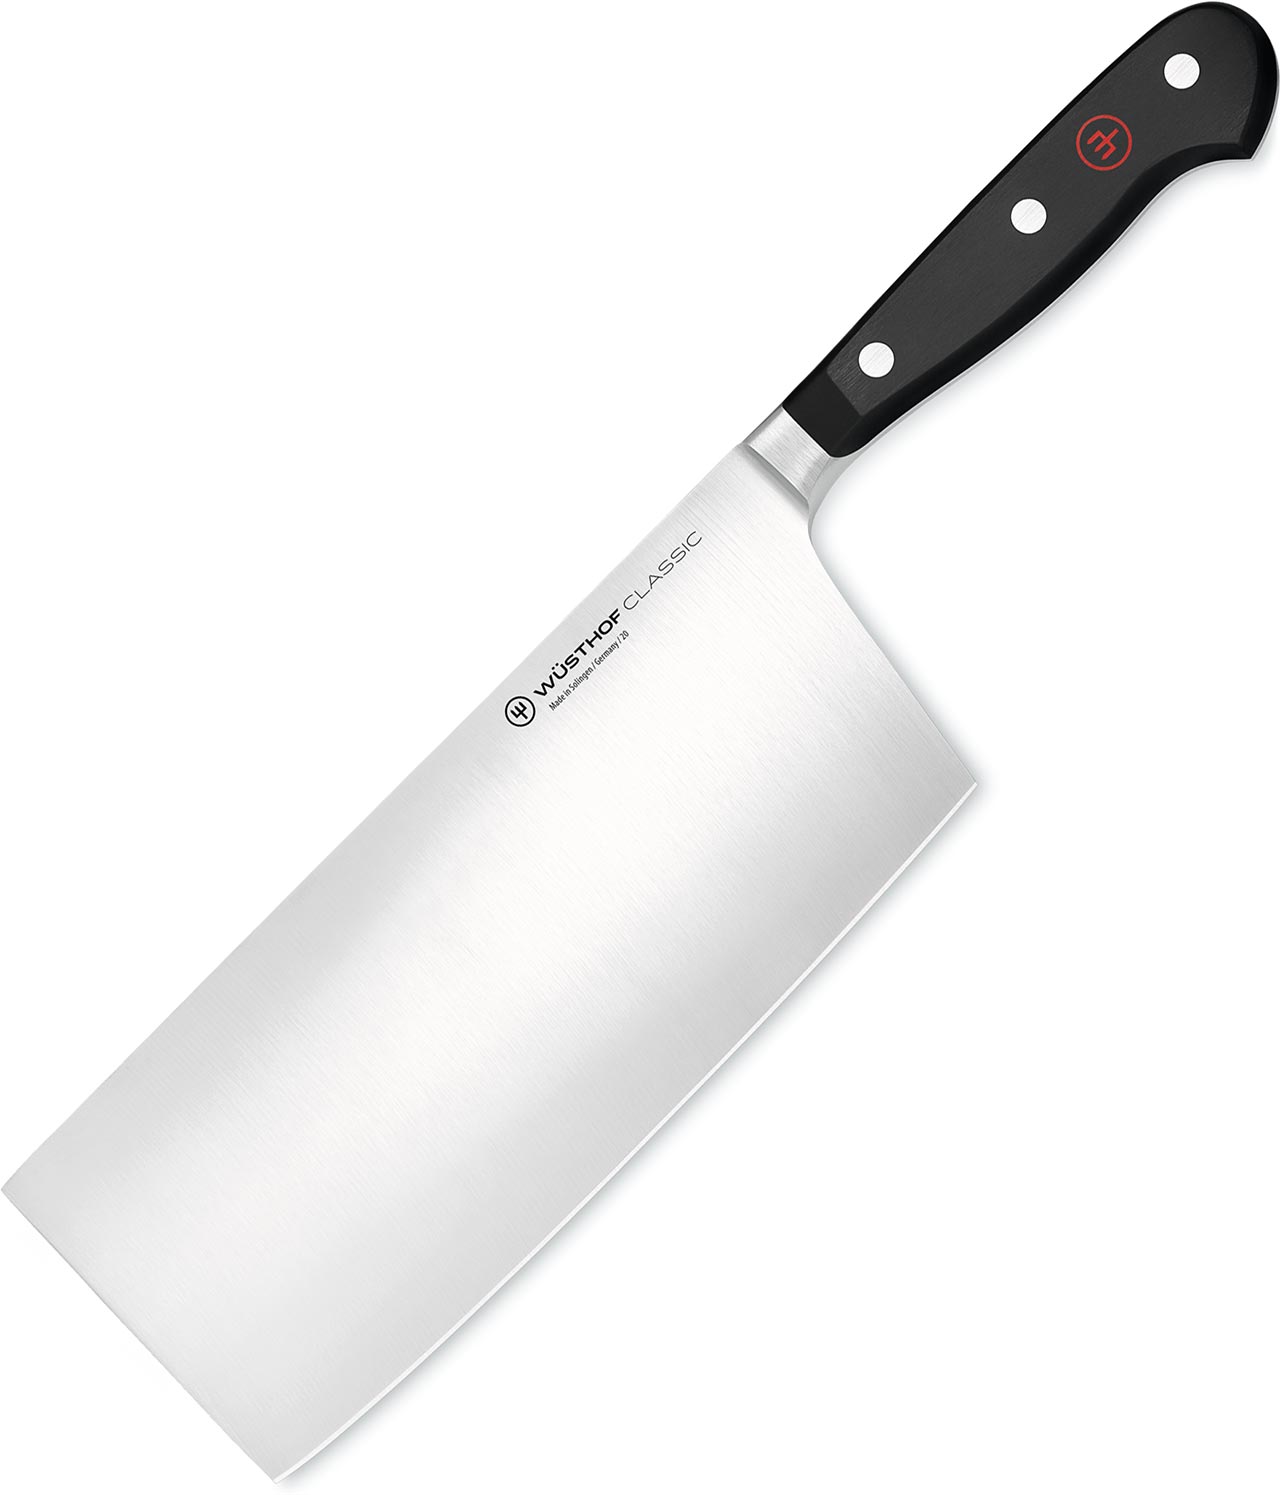 18cm Chinese Chef's Knife 1040131818